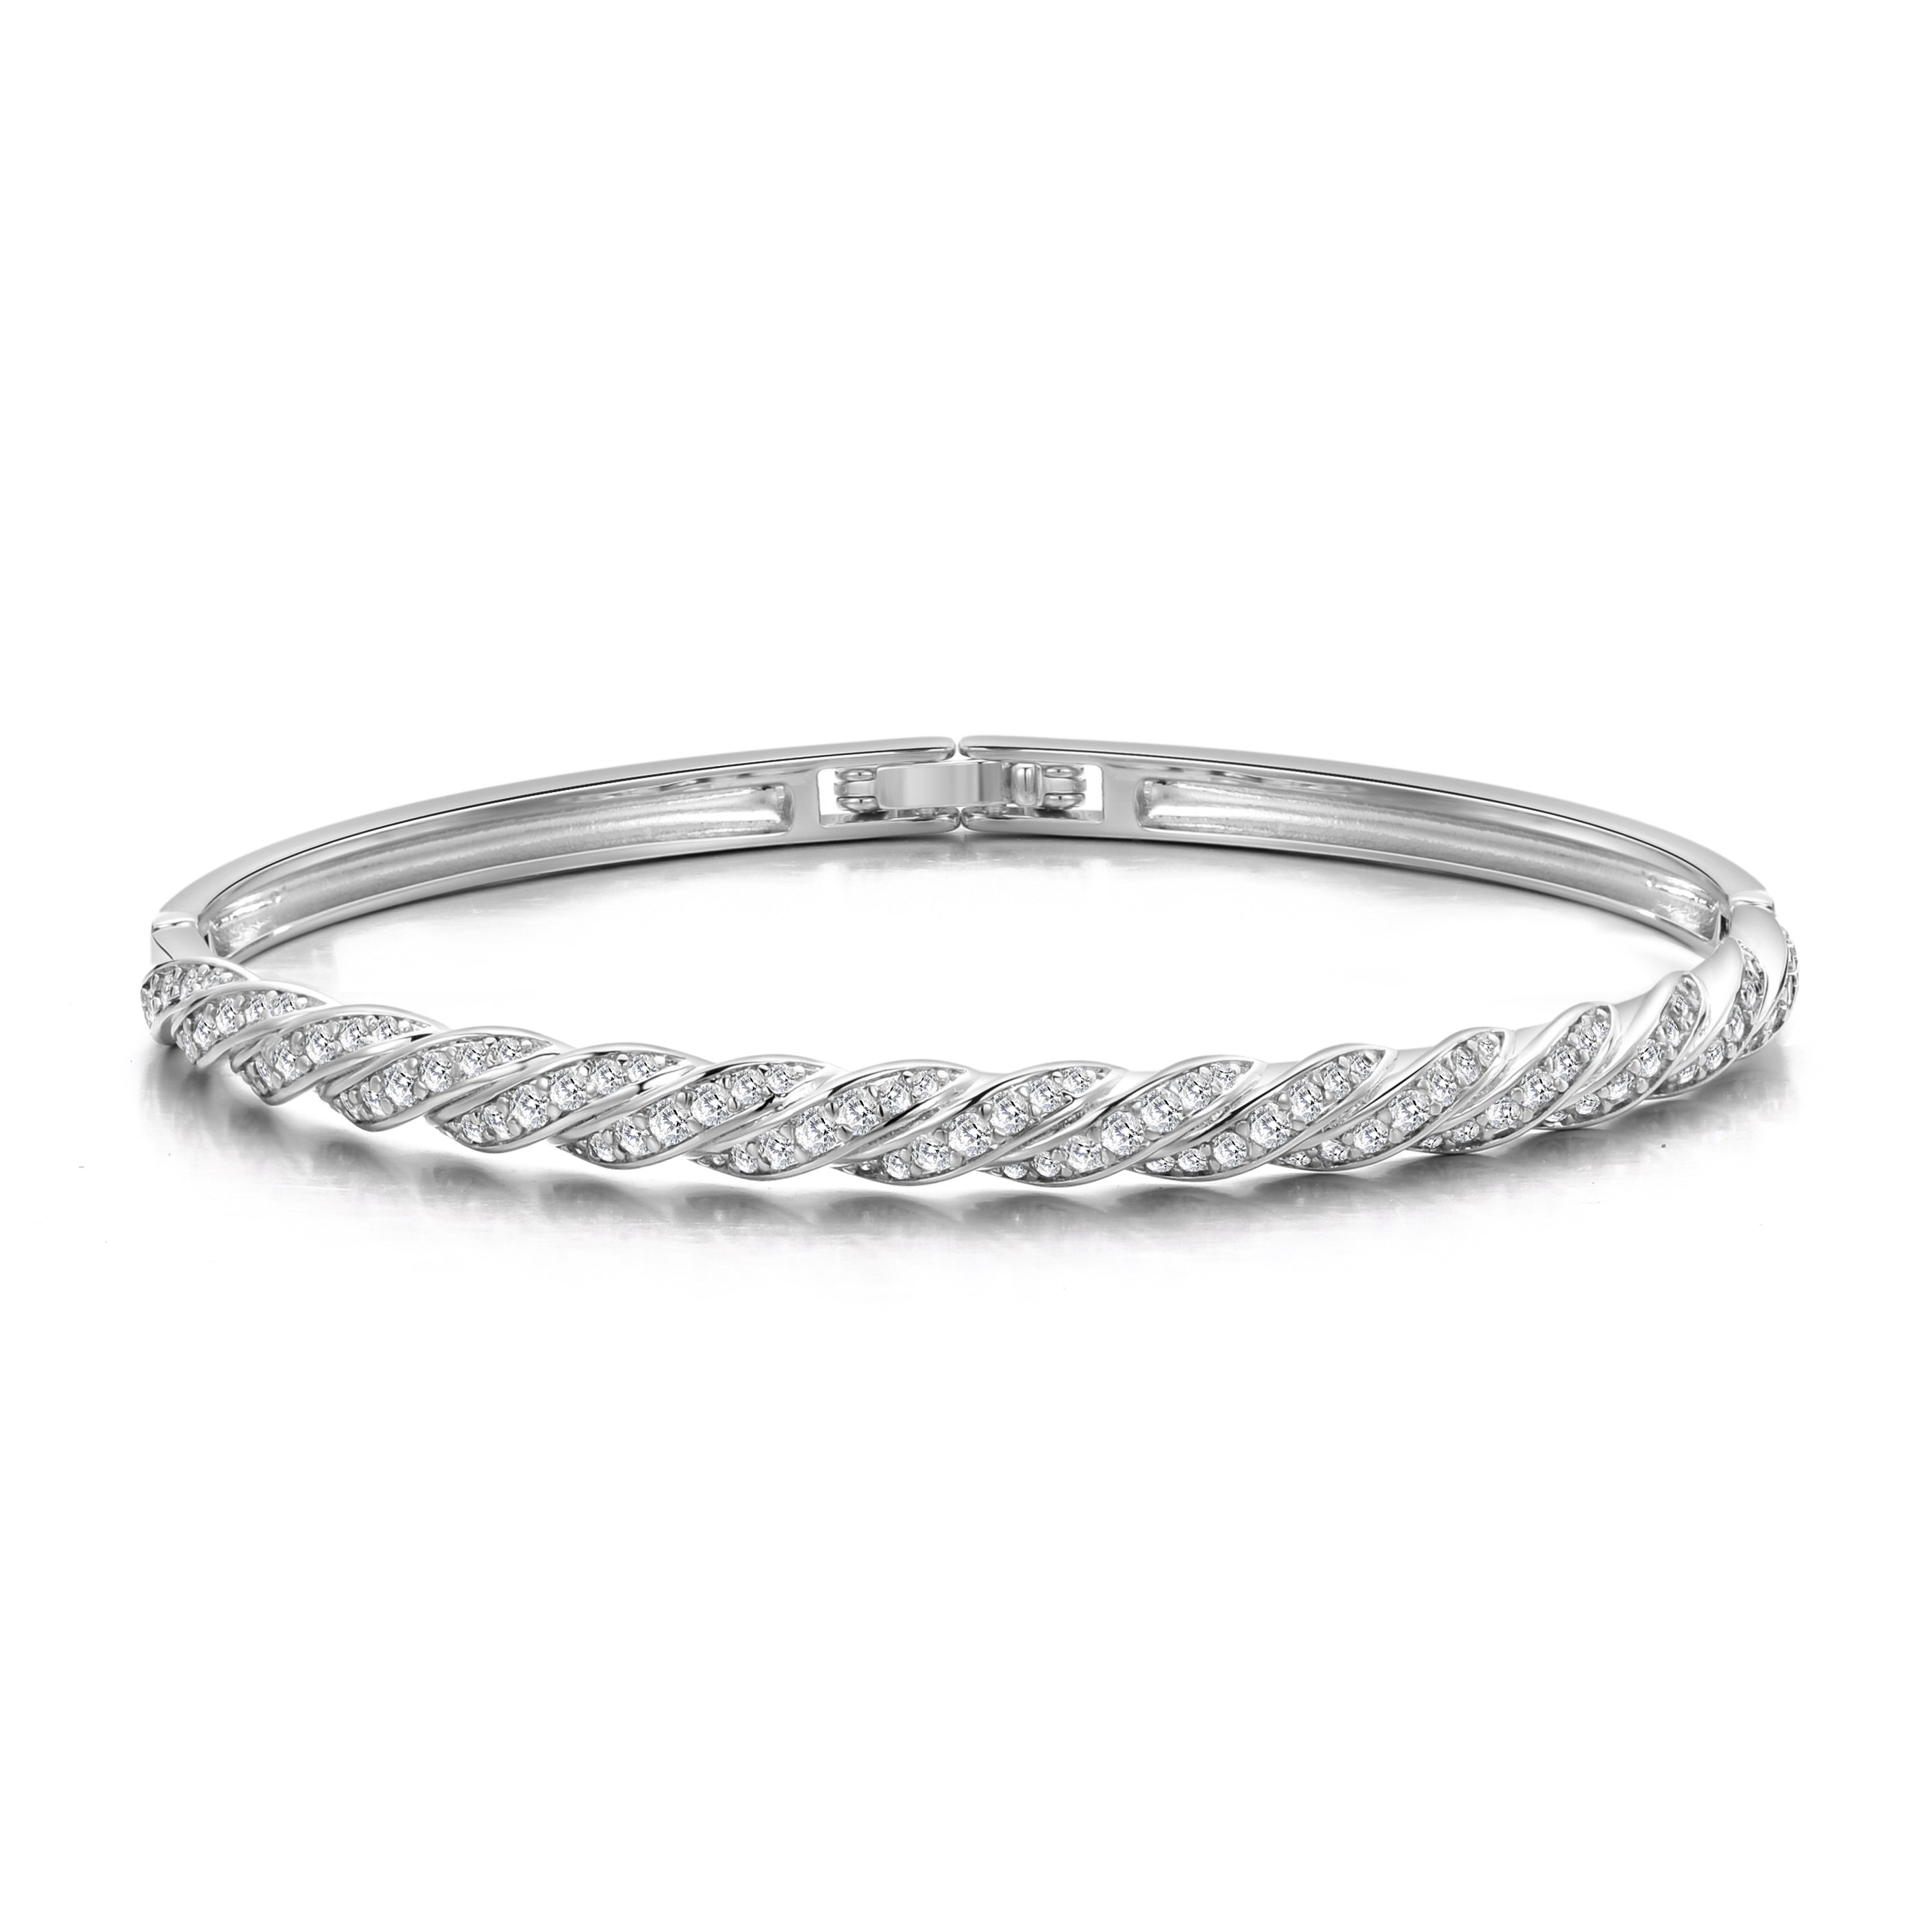 Silver Plated Twist Bangle Created with Zircondia® Crystals by Philip Jones Jewellery